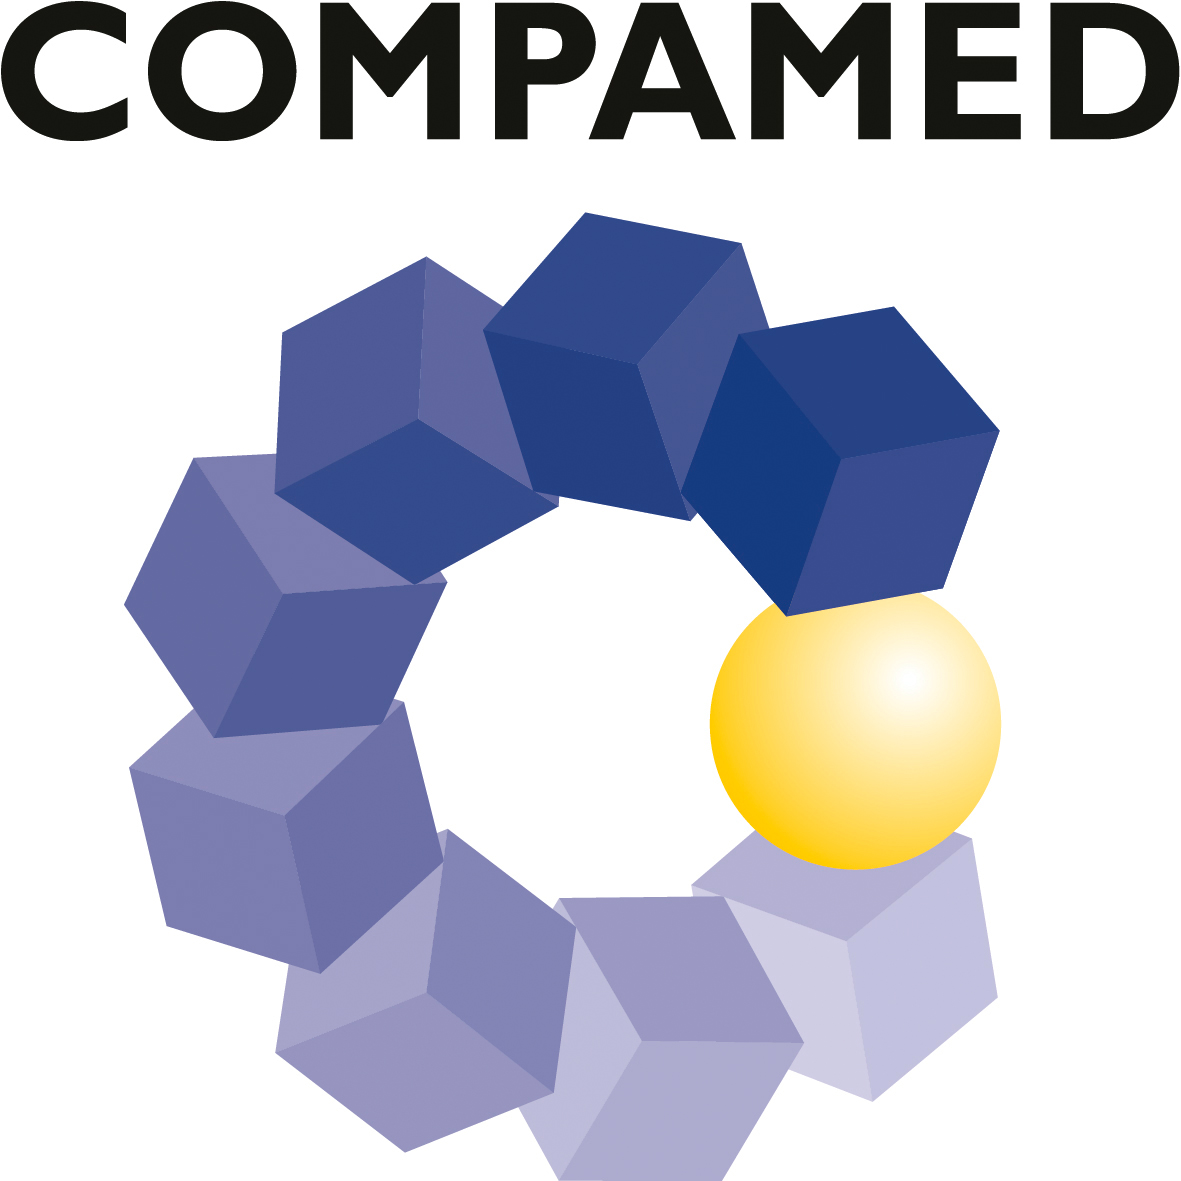 An image of the COMPAMED logo